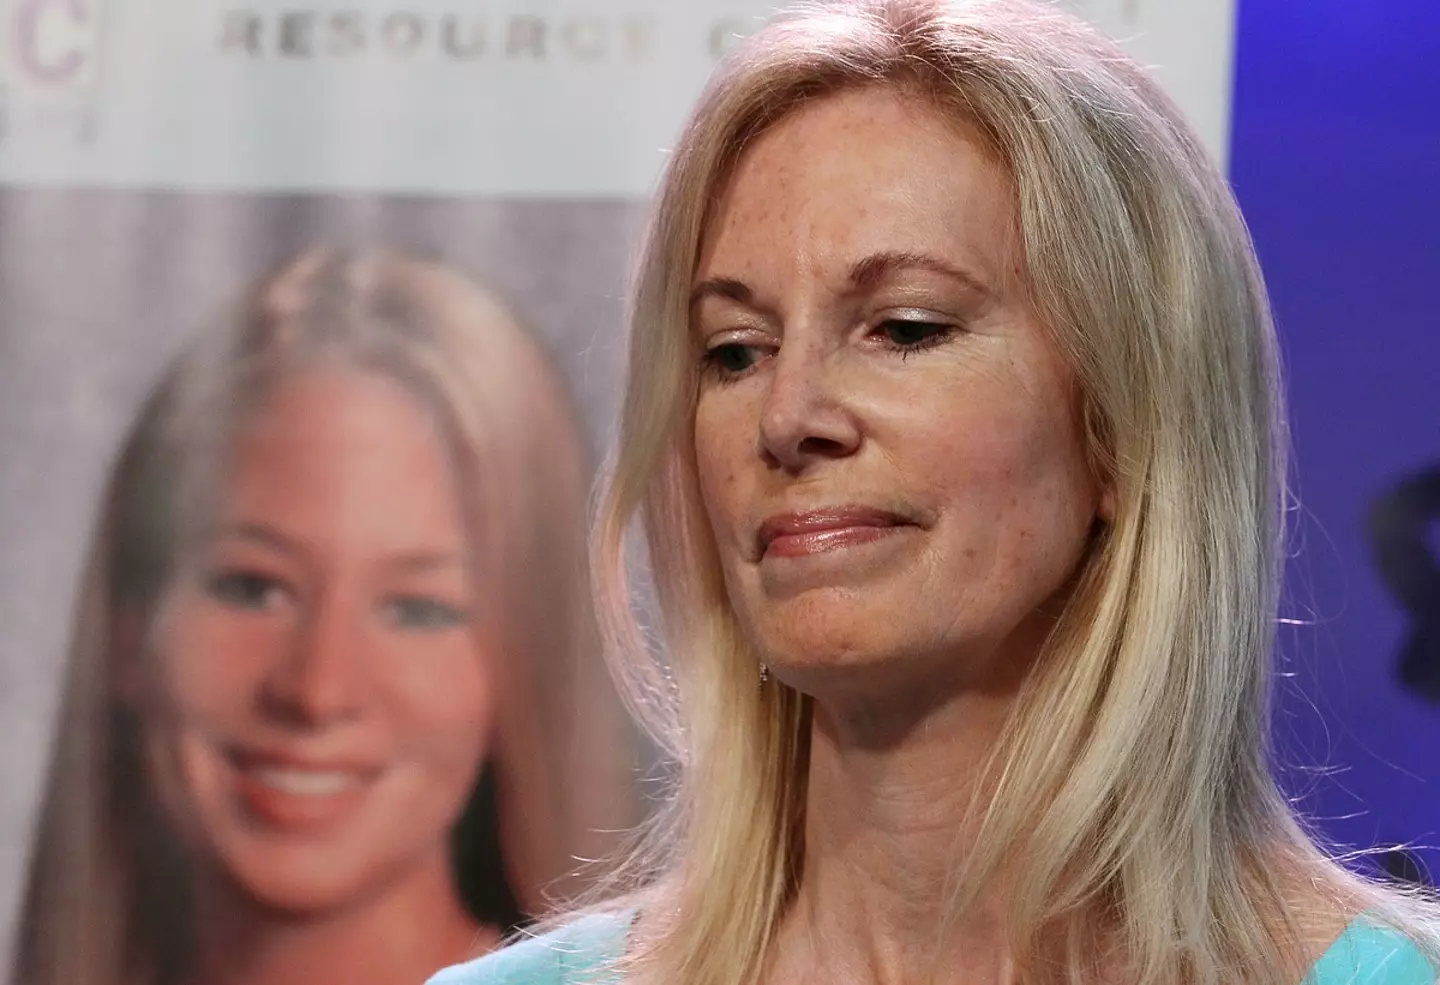 Beth Holloway had a final message for her daughter's killer.